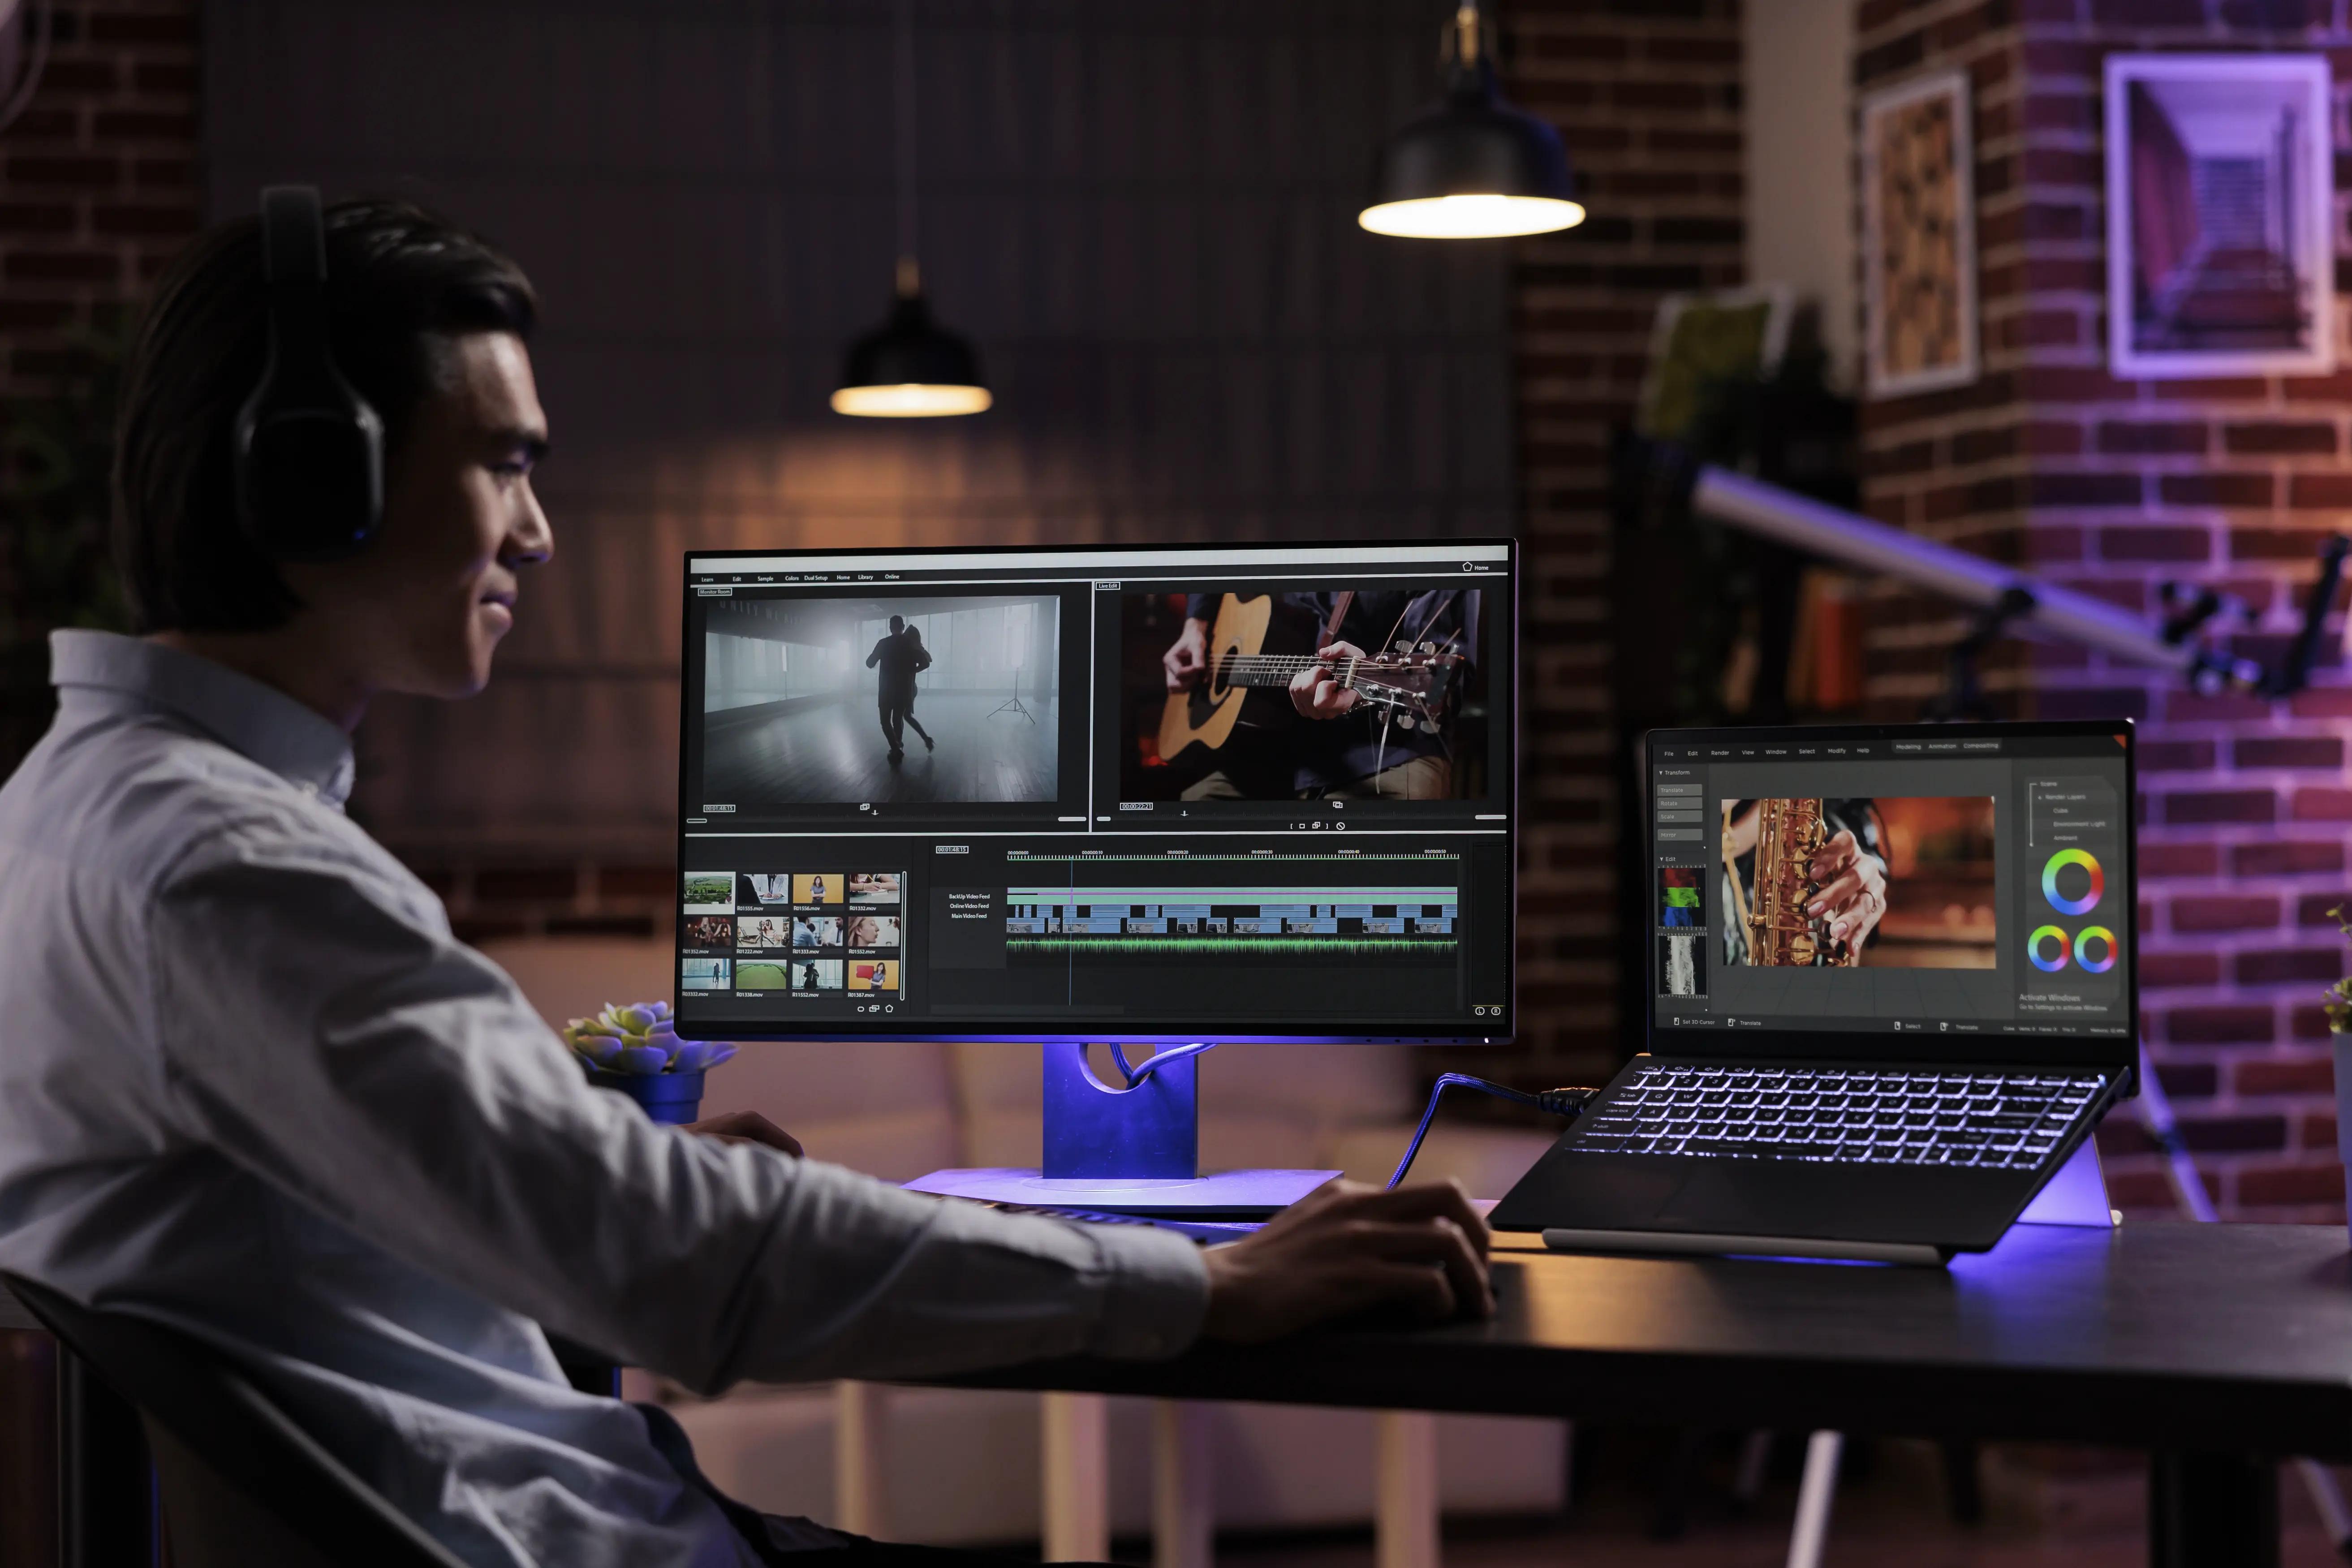 Focused young professional editing video footage on a sophisticated computer setup with color grading and special effects software, in a well-organized multimedia studio, showcasing the meticulous process of video production and post-production.